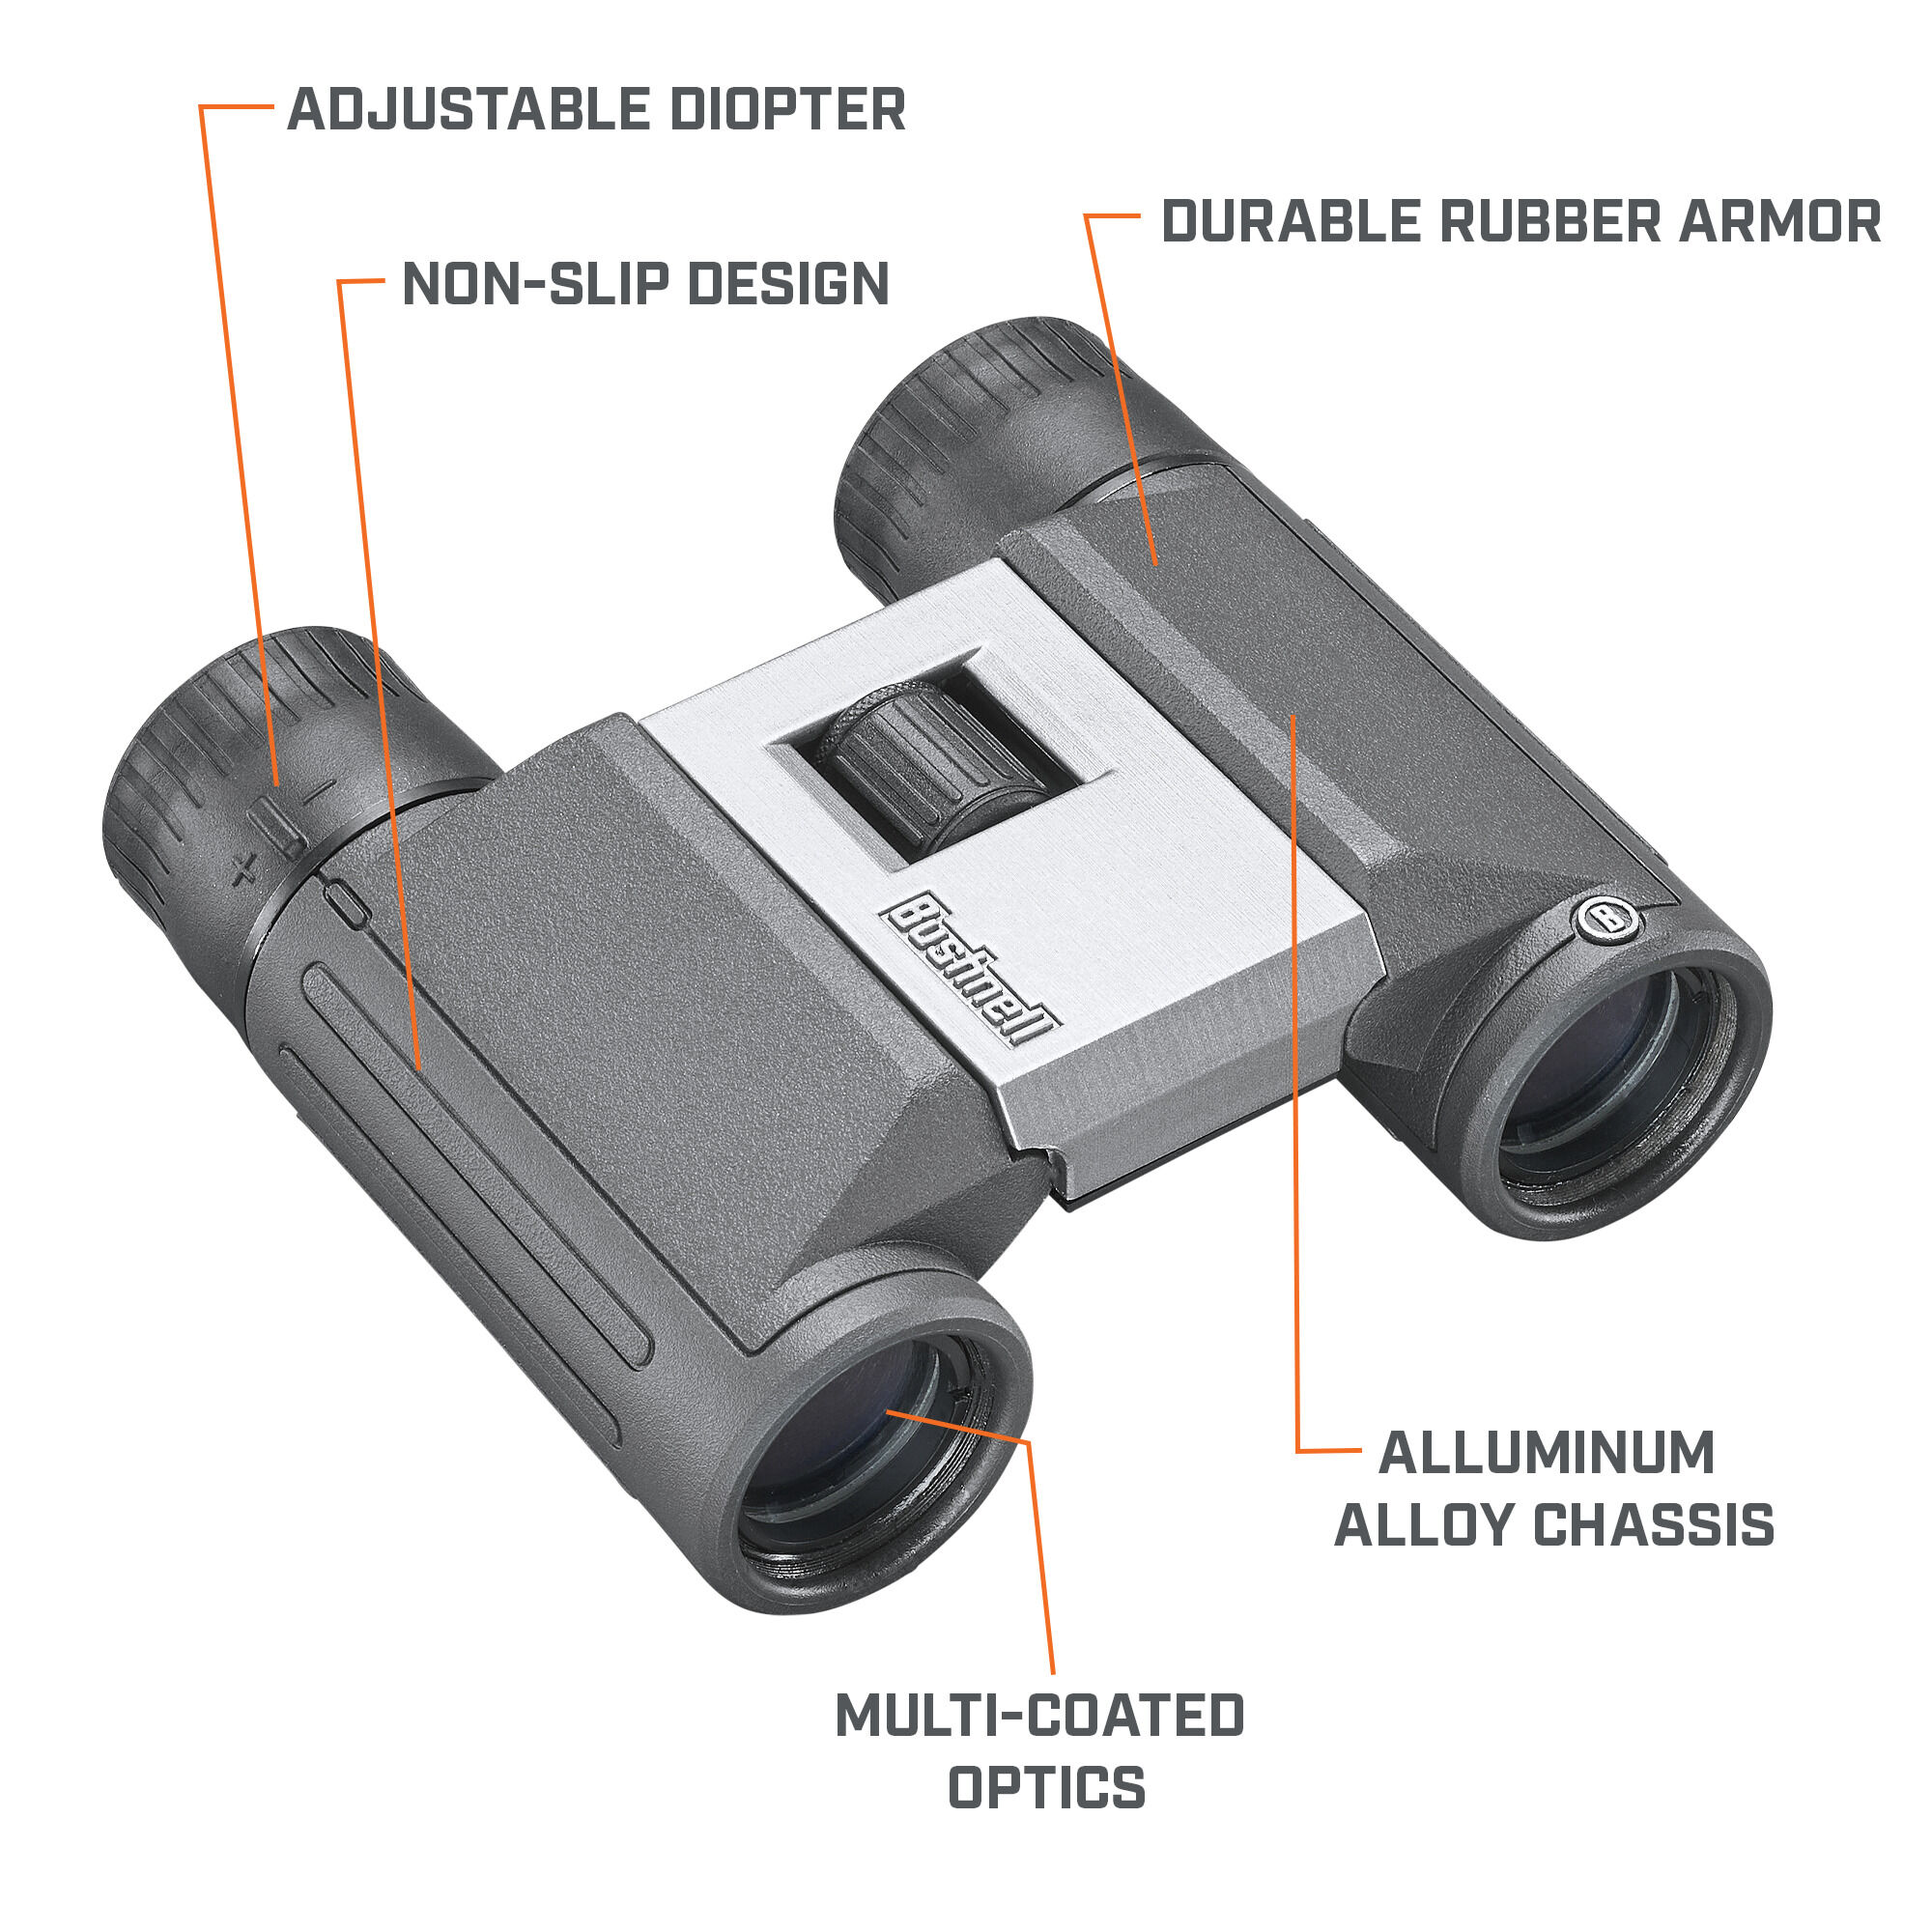 Powerview 2 Compact Binoculars, 8x21 Magnification| Bushnell